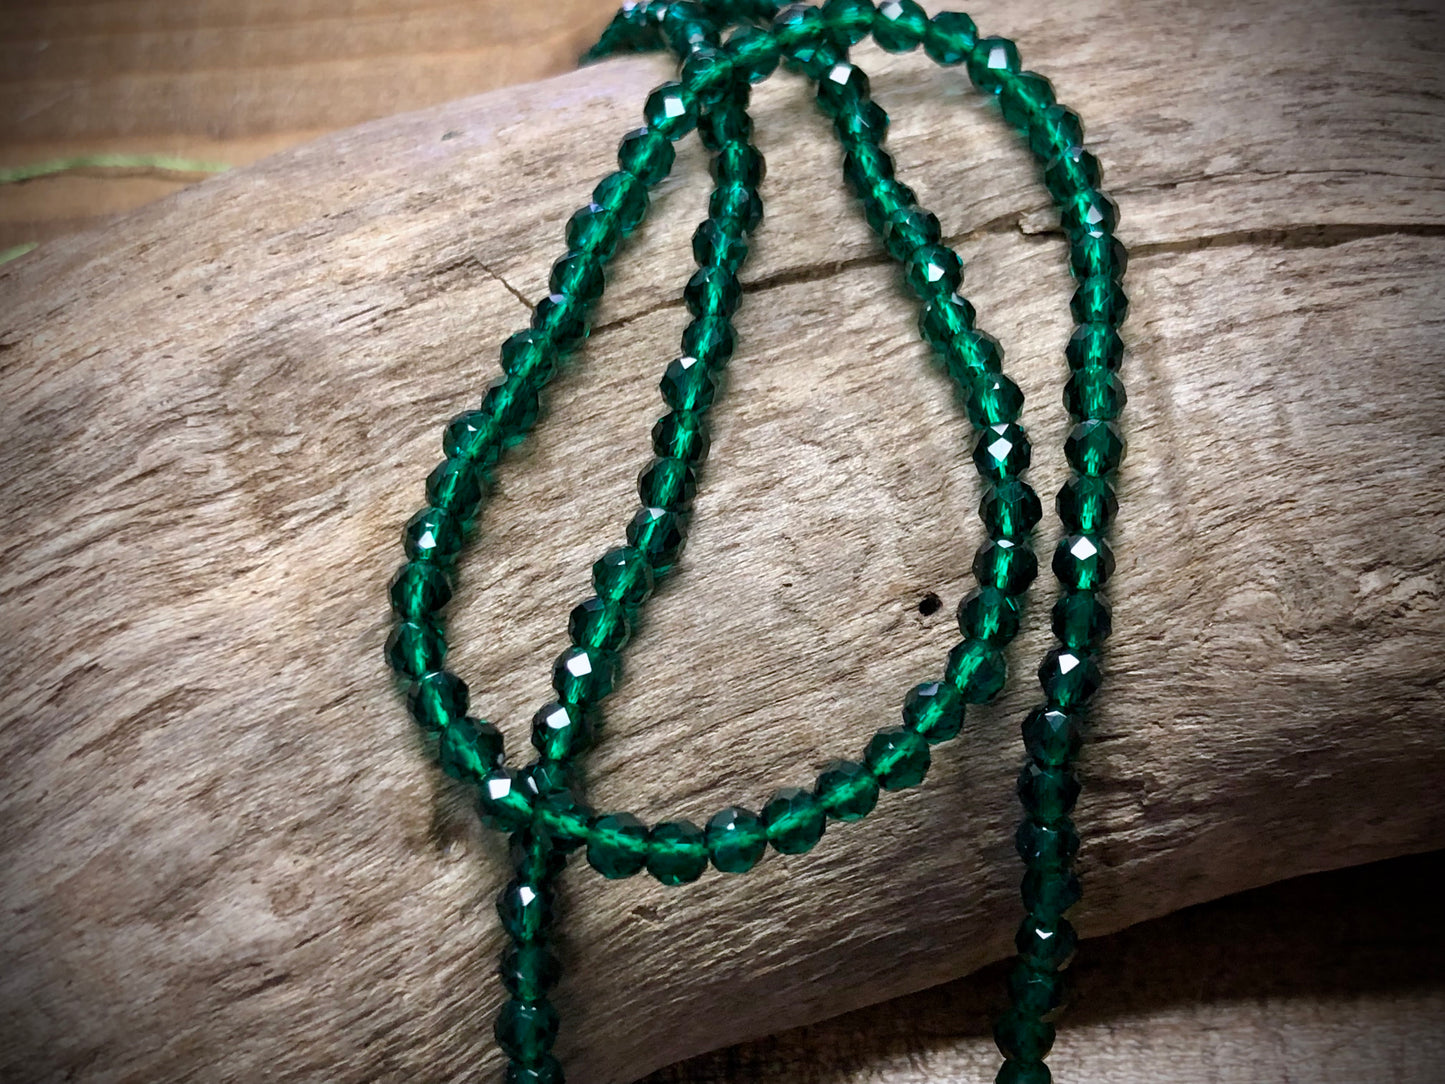 Thunder Polish Glass Faceted Rounds Strand - Emerald Green - 3mm - 14”